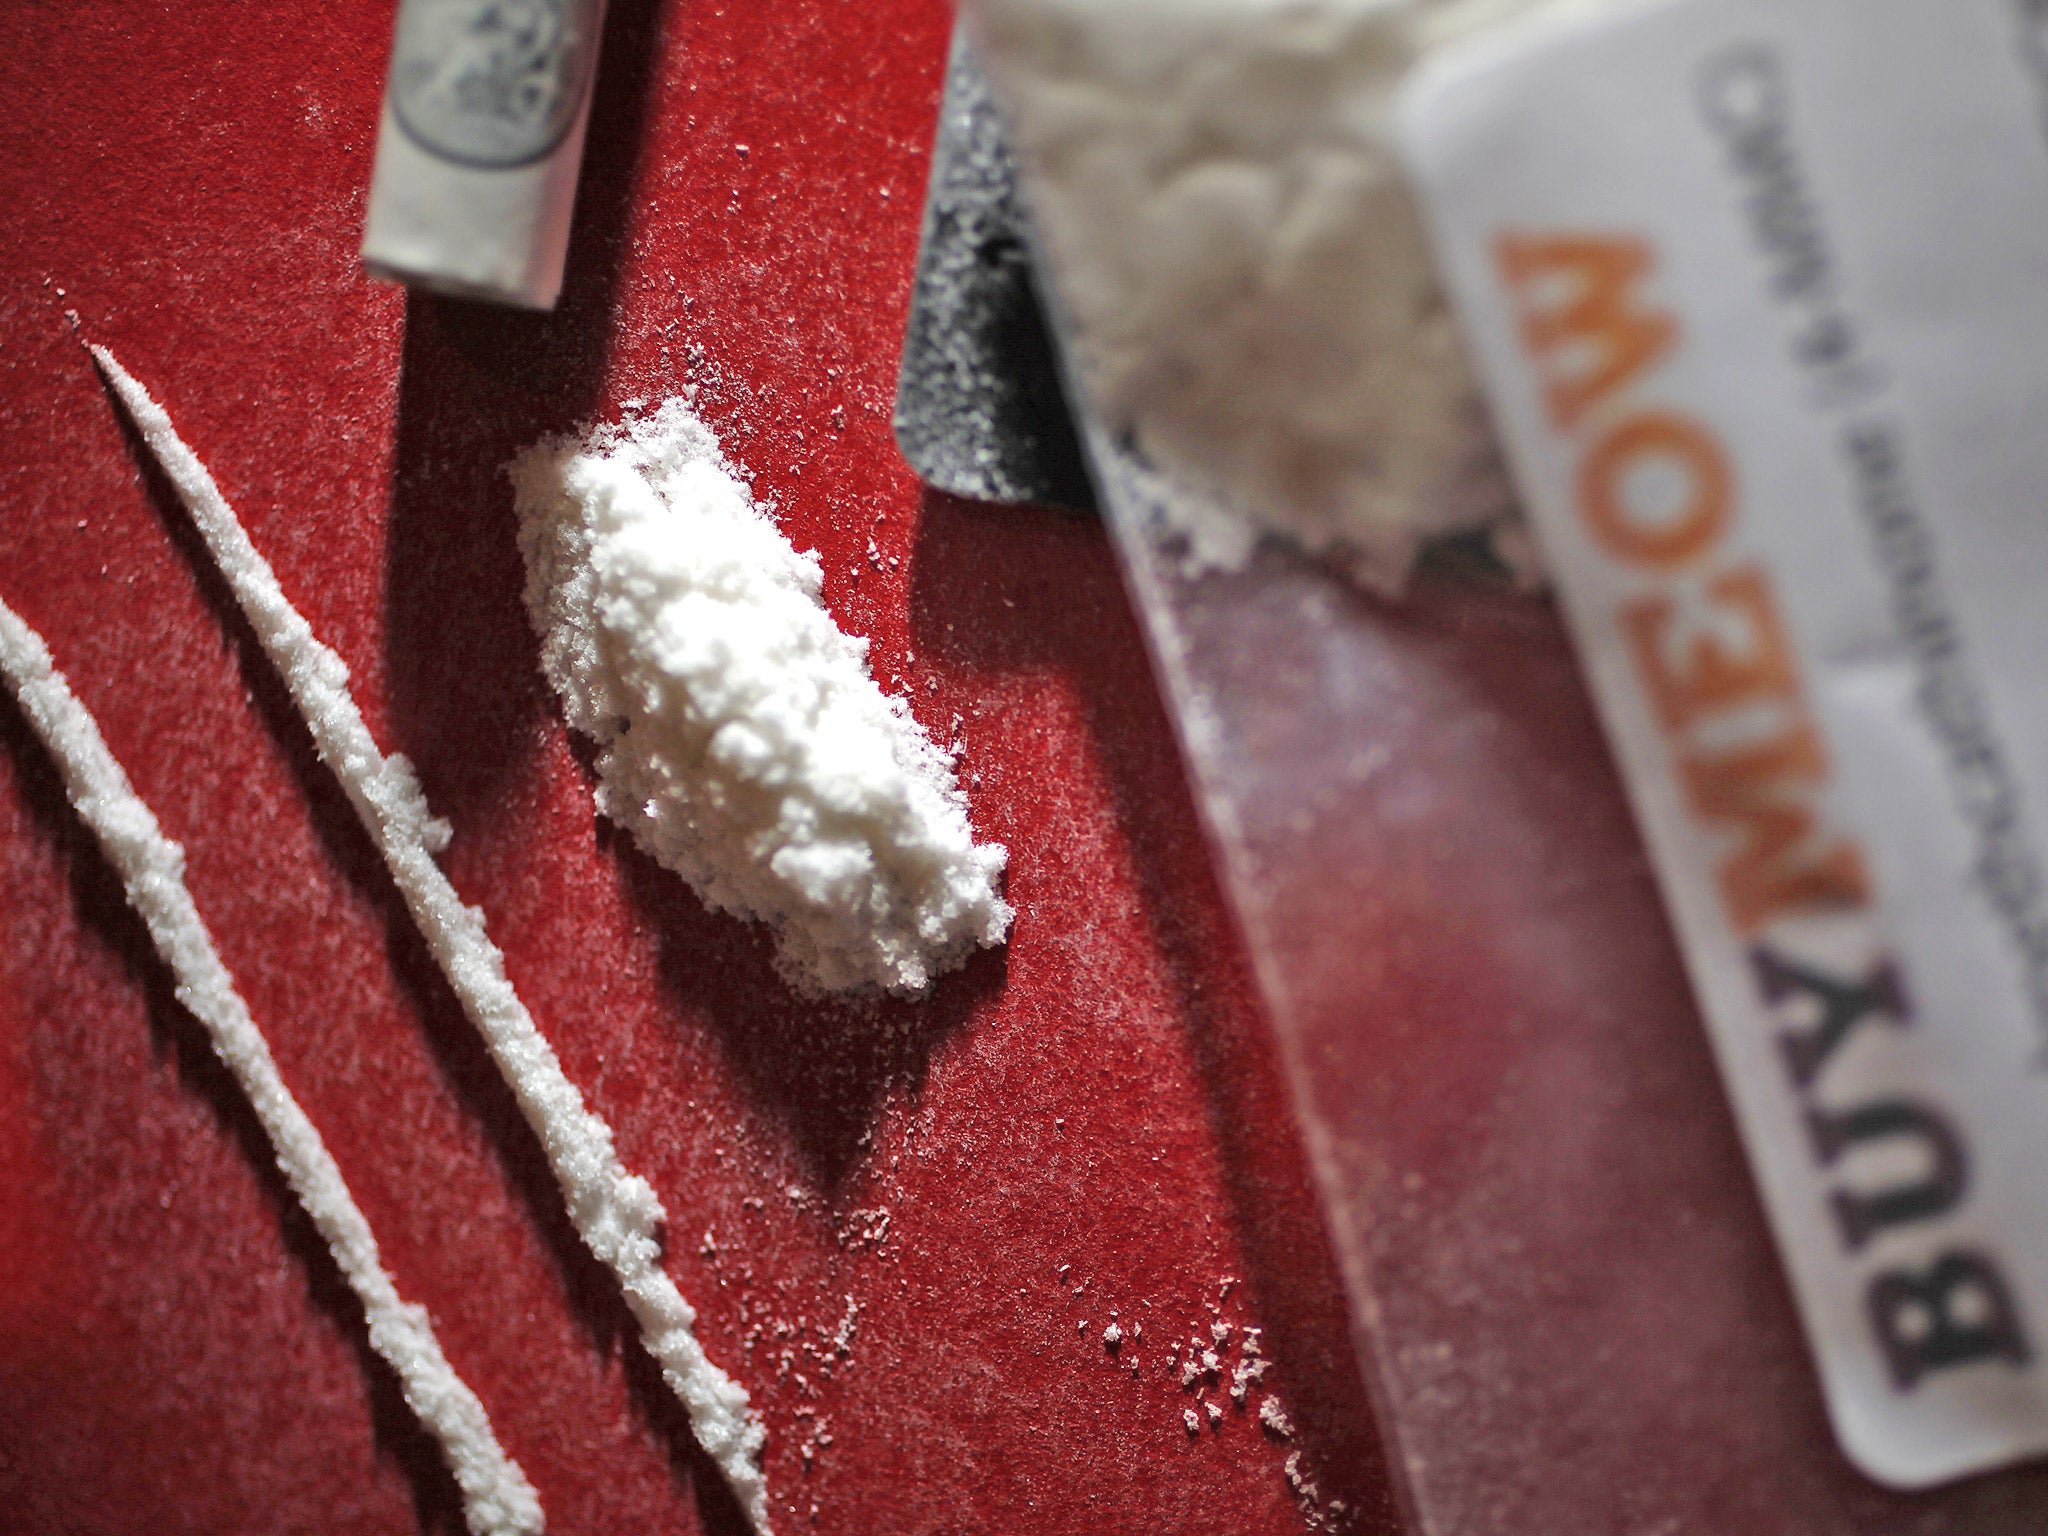 Campaigners argued the increase in women dying from cocaine could be driven by addiction services being male-dominated spaces which can feel dangerous for women